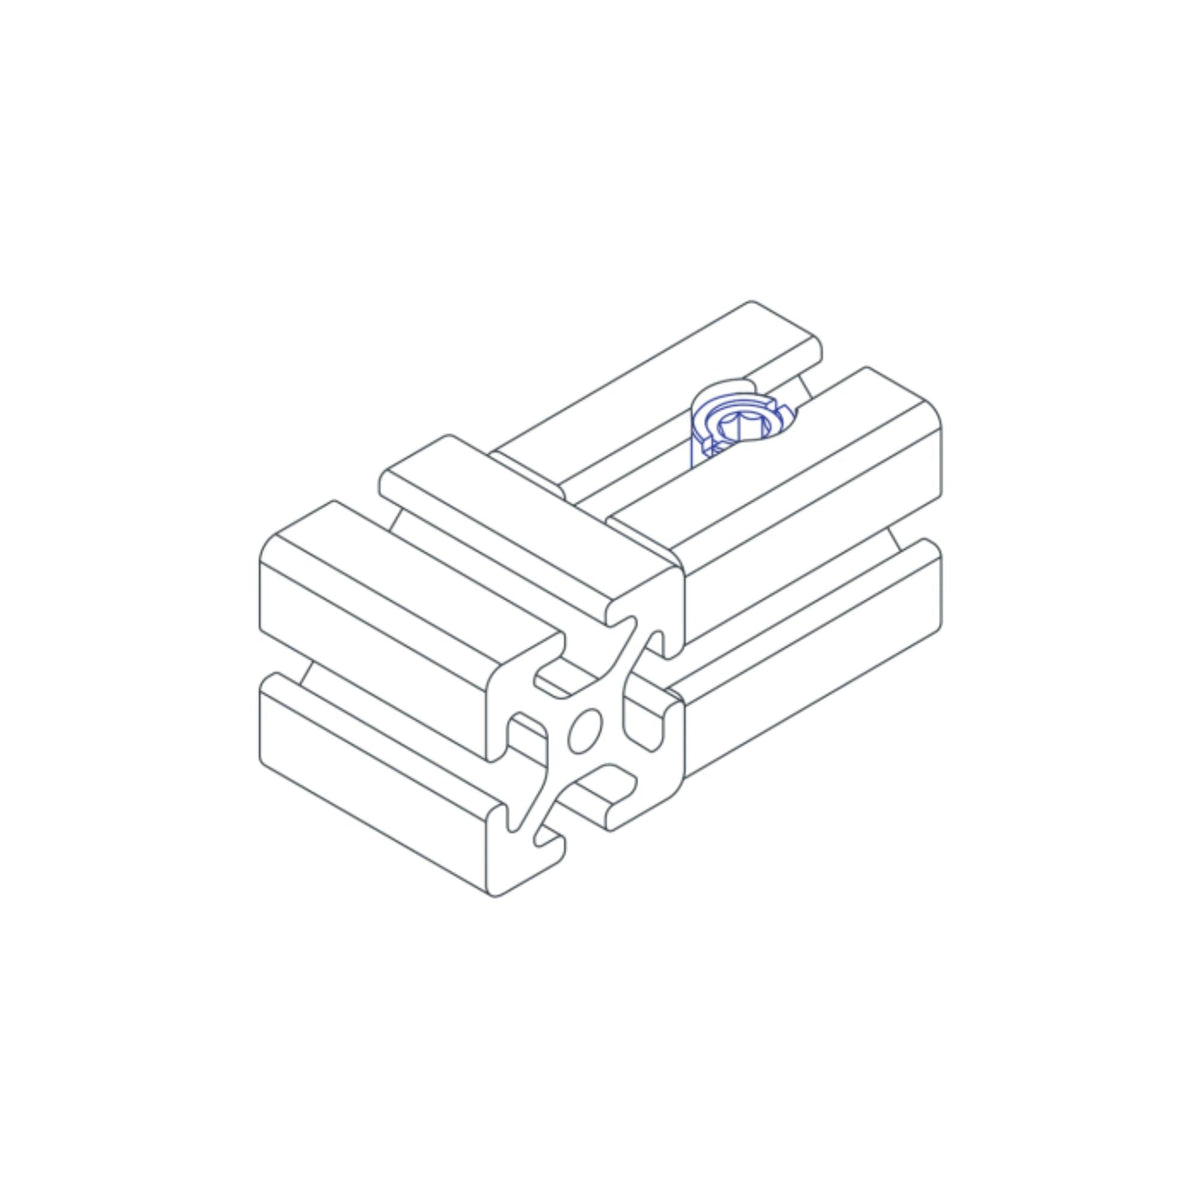 diagram of a central connector and a t-slotted bar